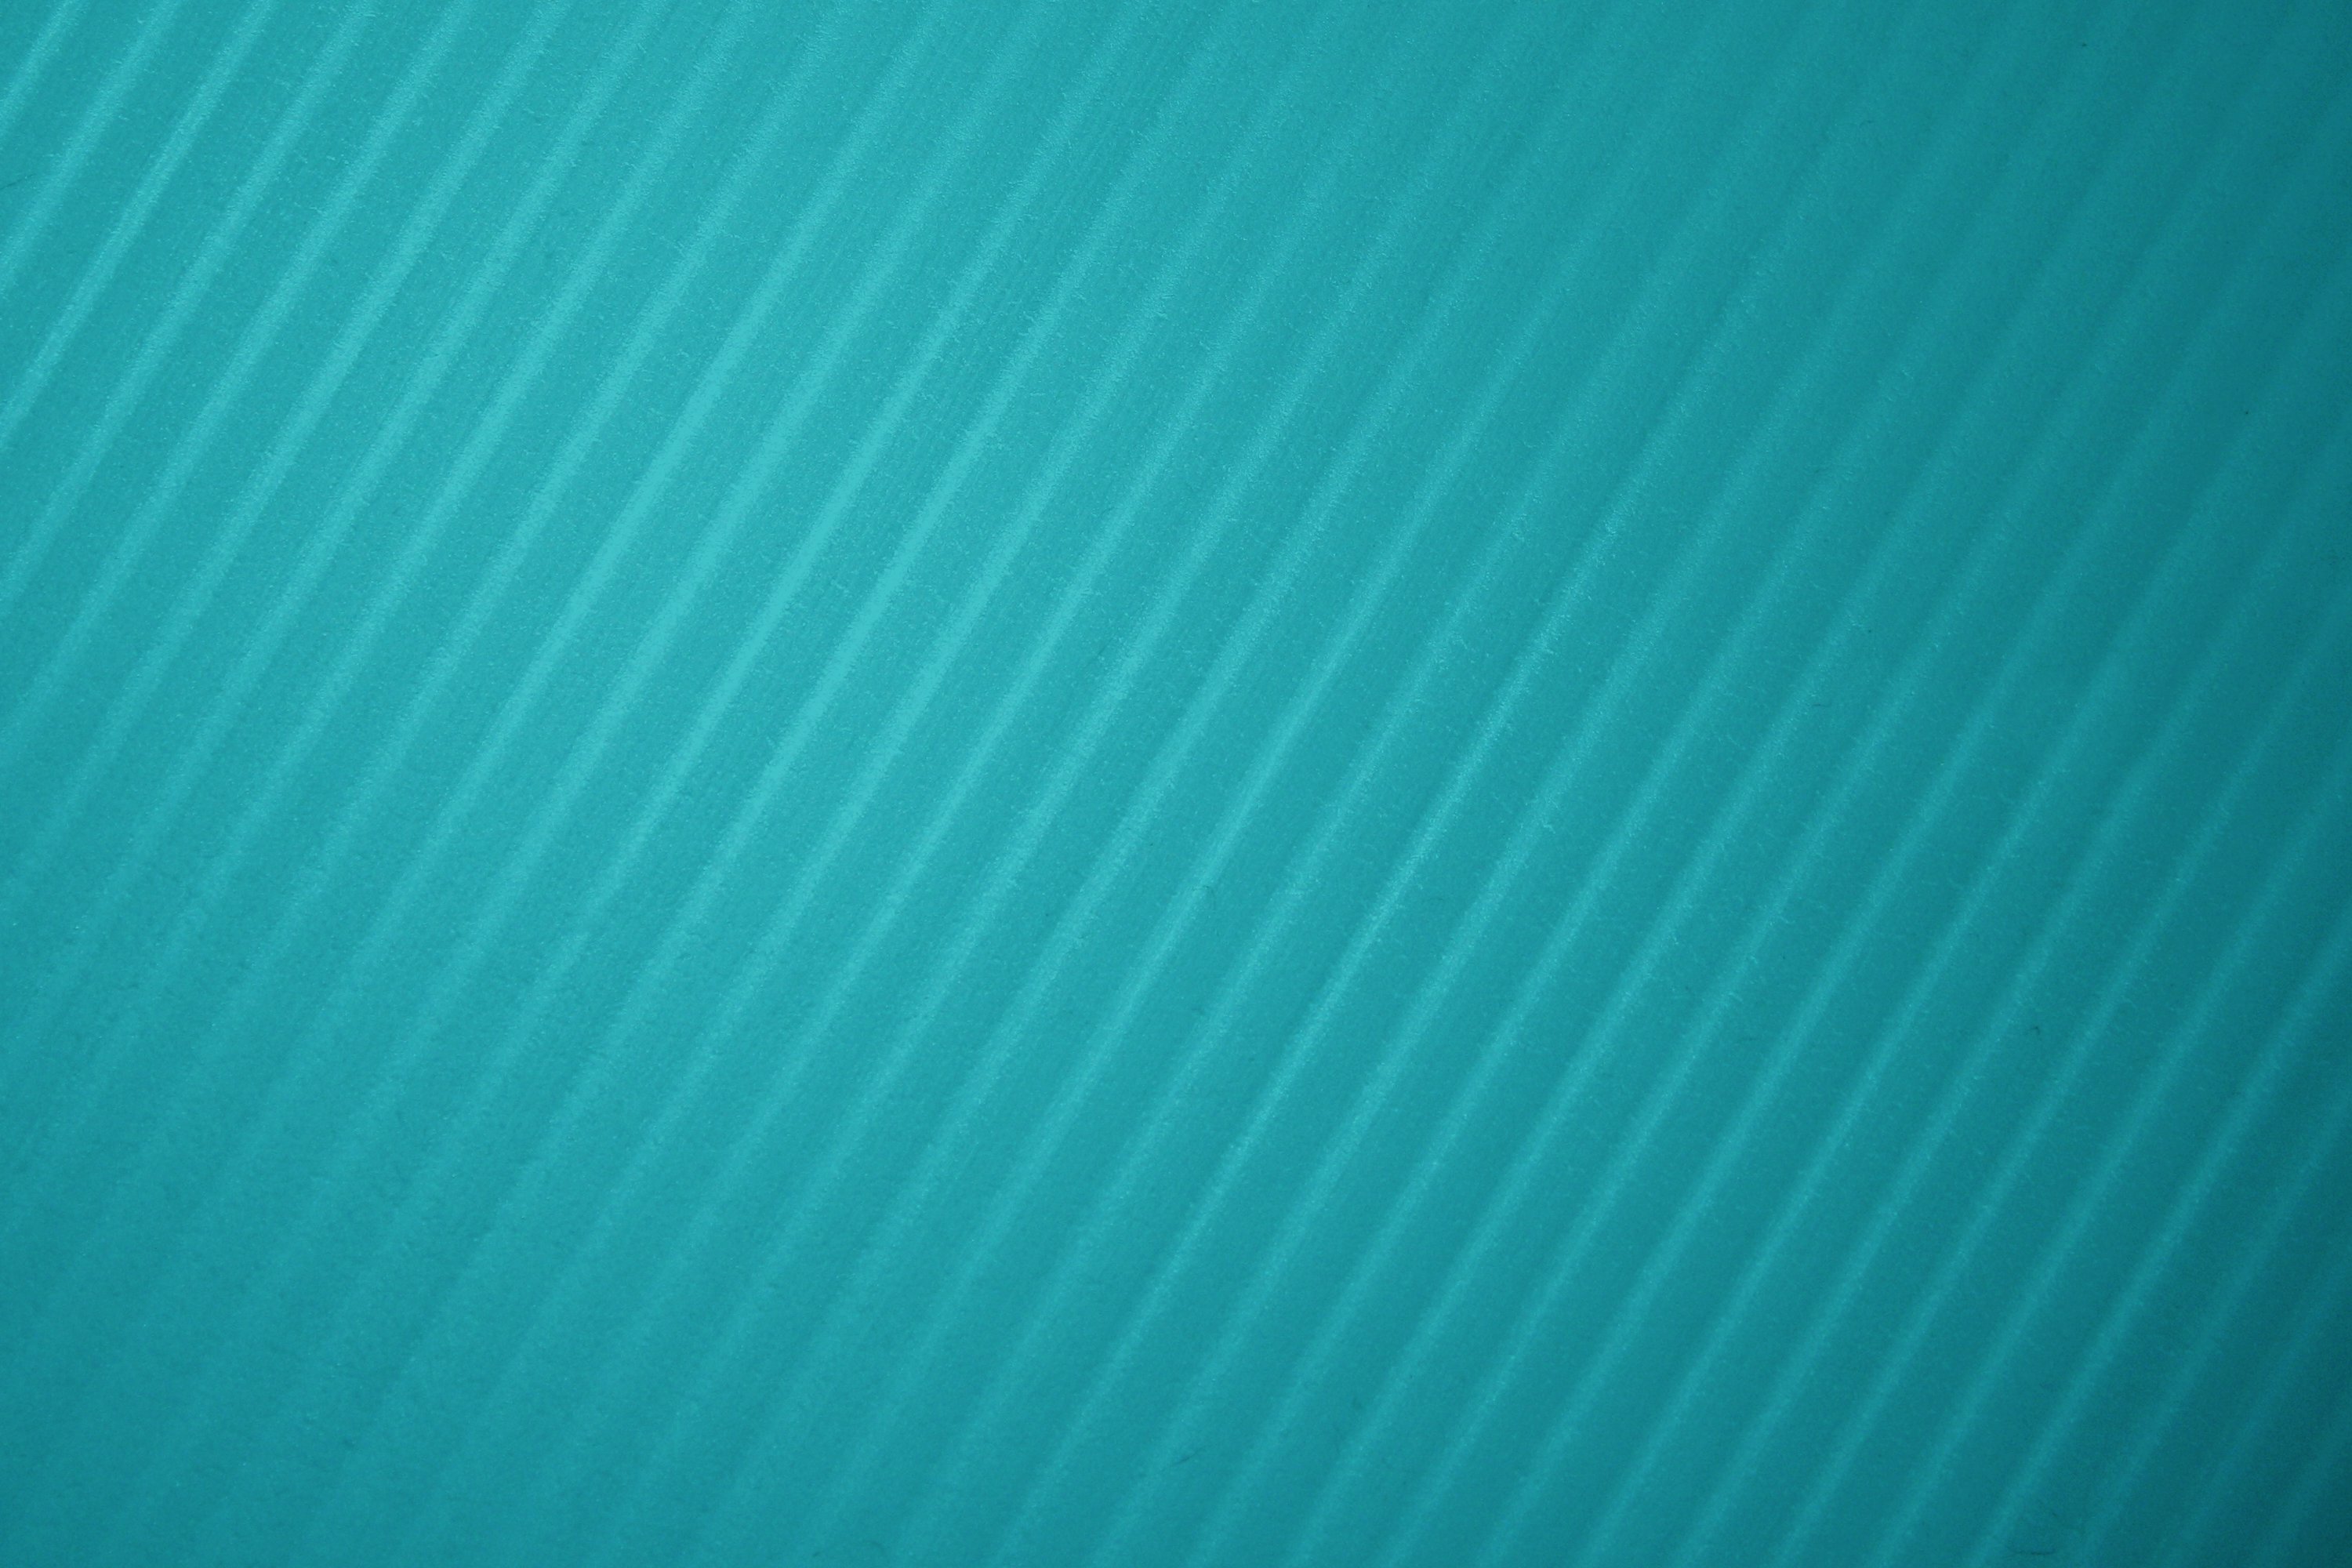 Teal Wallpaper HD High Quality | Wallpapers, Backgrounds, Images ...